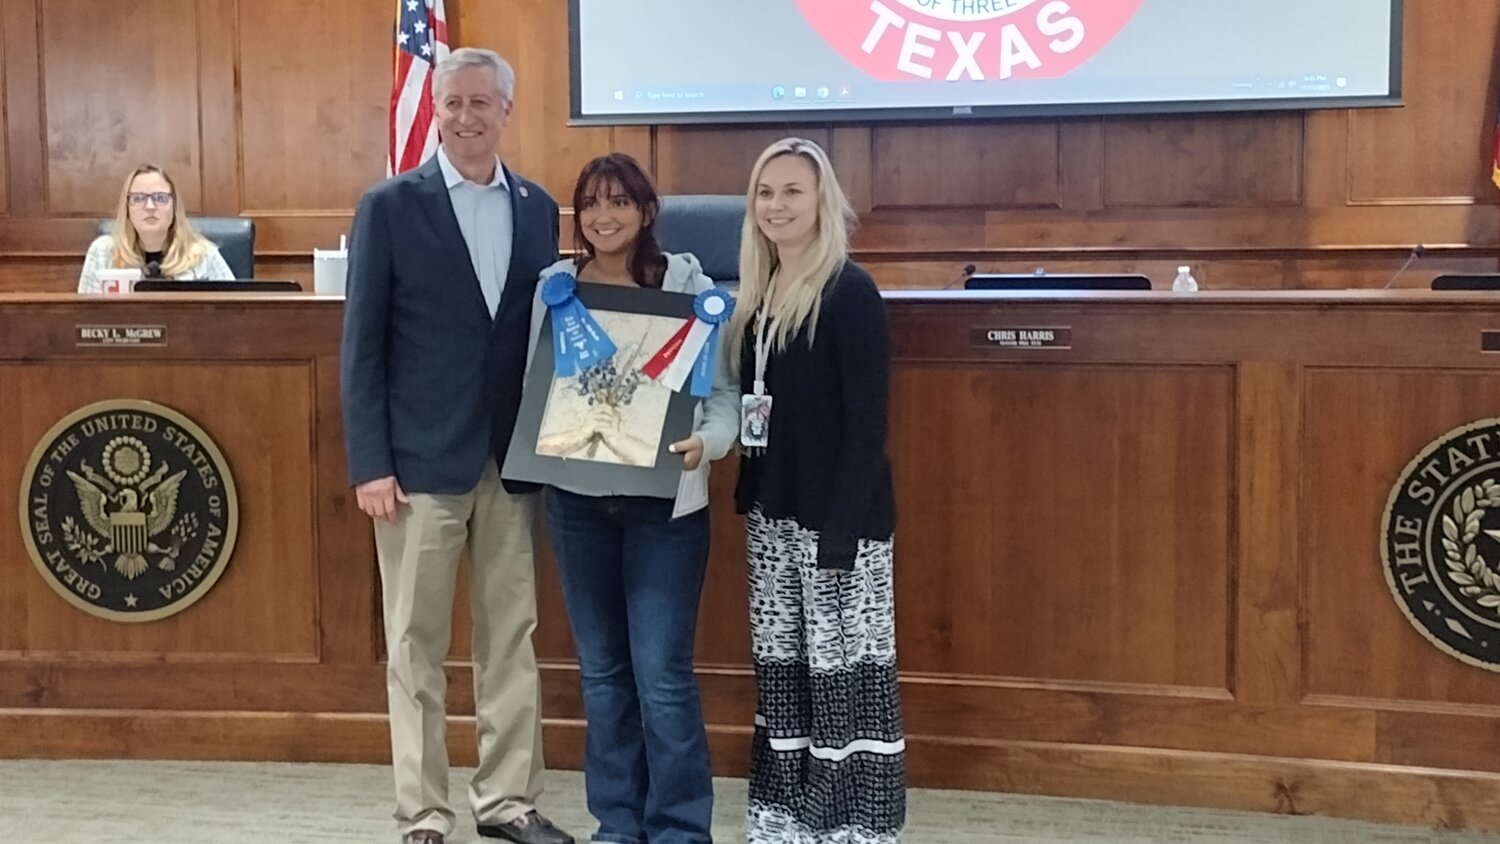 Katy Mayor Dusty Thiele (left) and Ashley Lipsman, City of Katy tourism and marketing event coordinator (right), recognize Mariam Elsherbiny (center) as the winner of the 2023 Katy Rice Harvest Festival art contest “Best of Show” for her art piece “Wildflowers.”